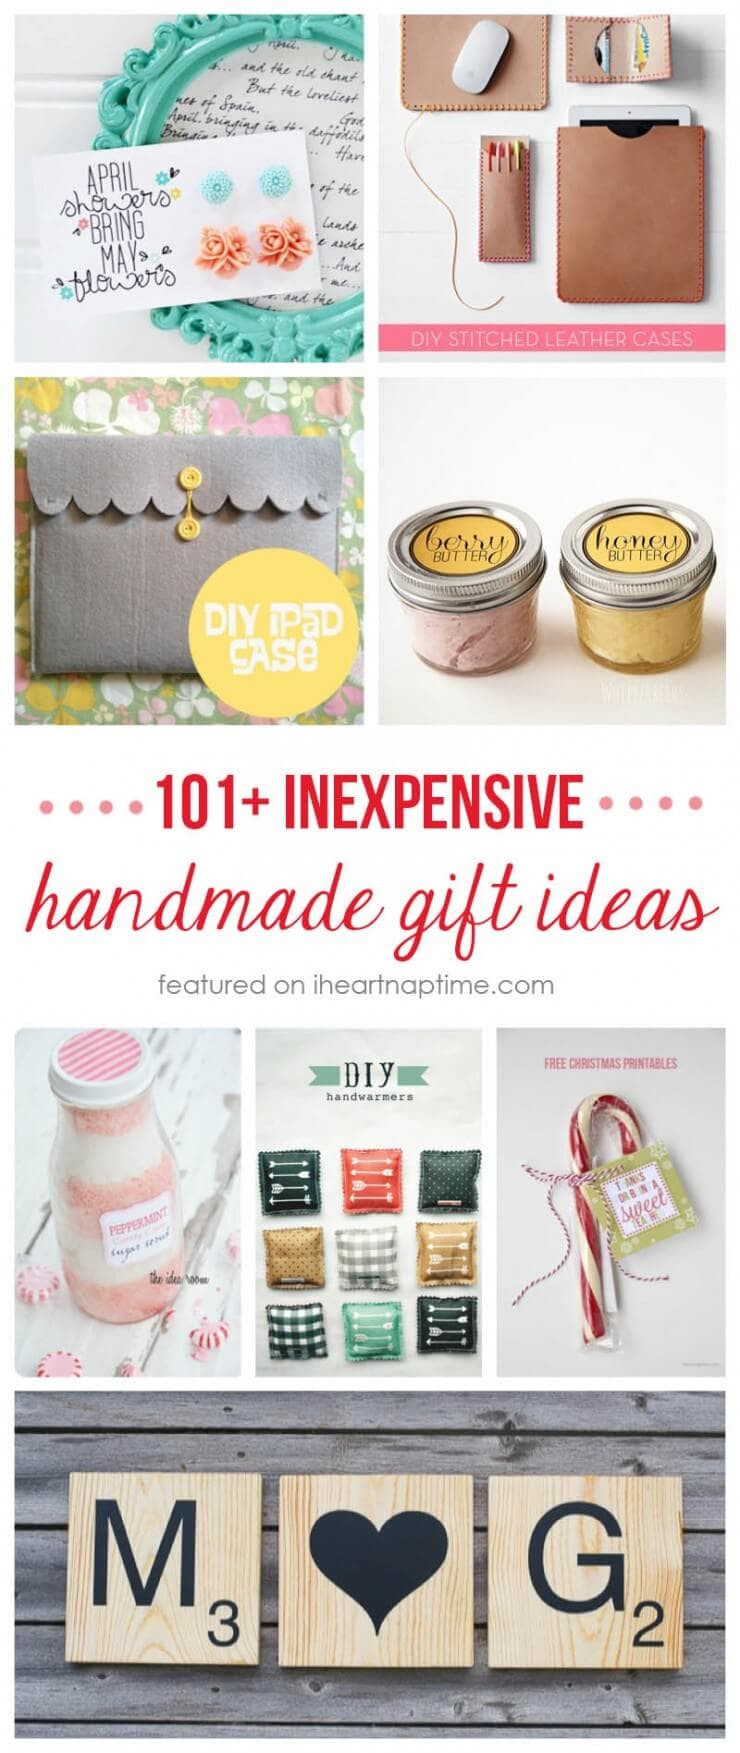 Easy Cheap DIY Christmas Gifts
 50 homemade t ideas to make for under $5 I Heart Nap Time